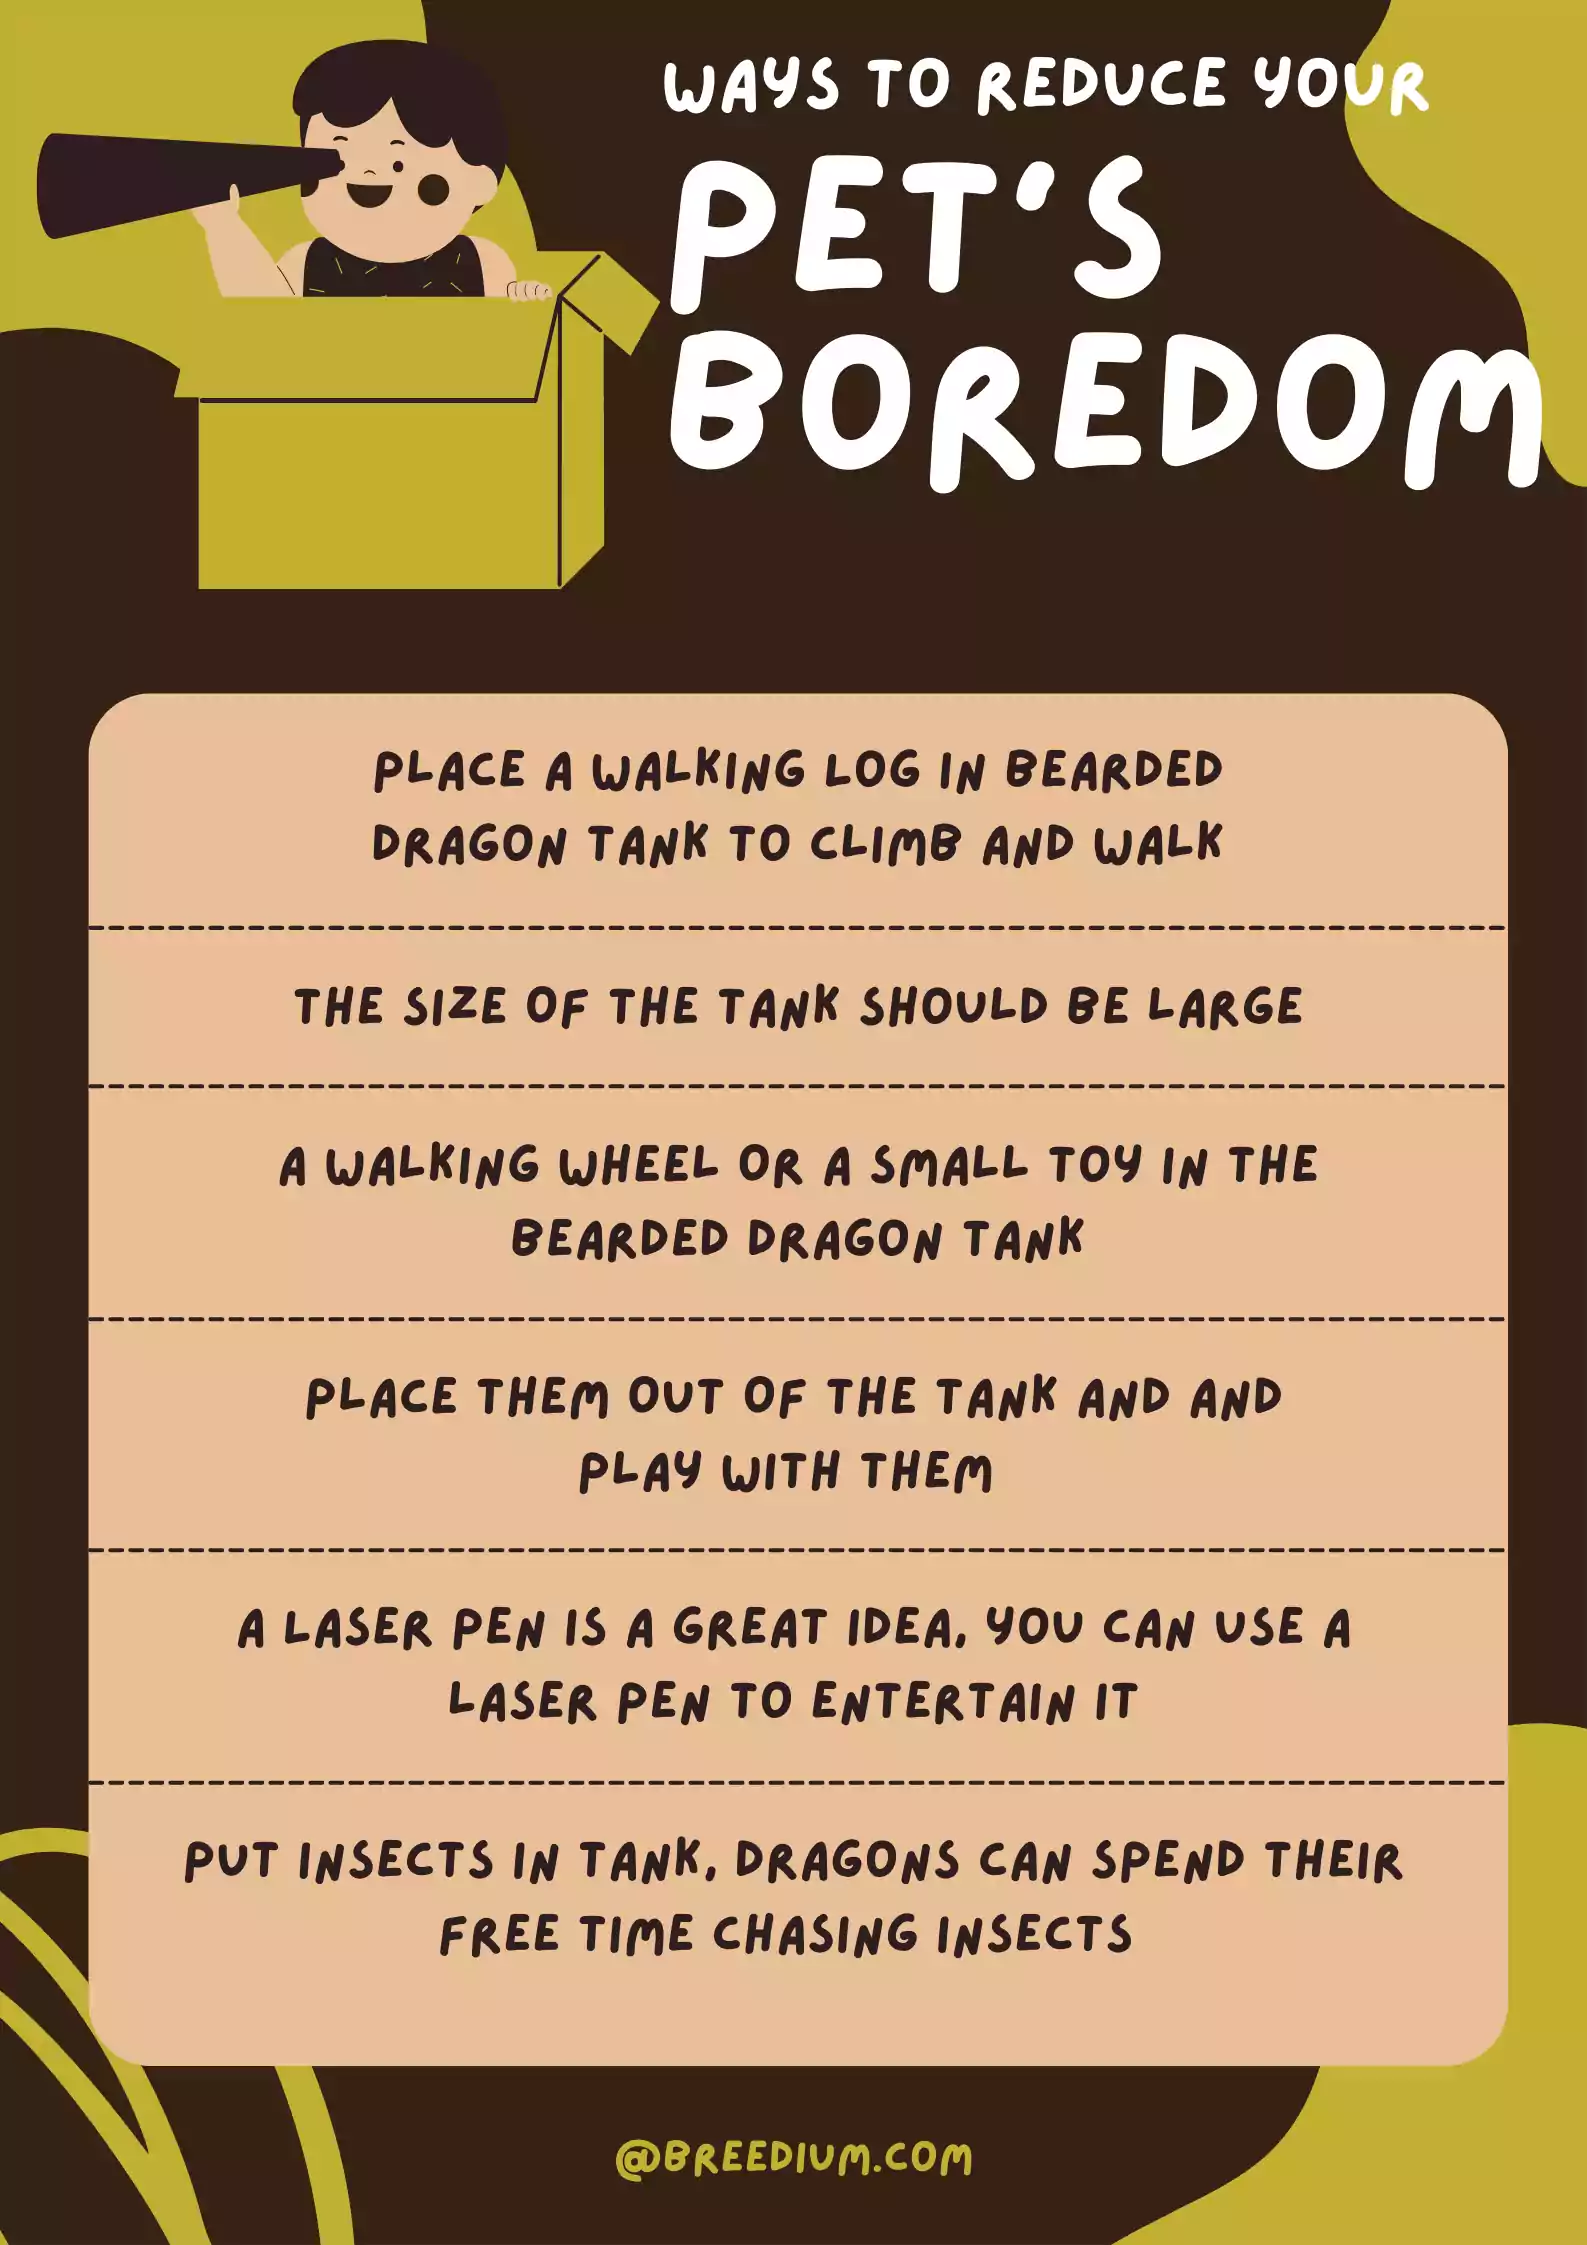 Ways To Reduce Your Pet’s Boredom